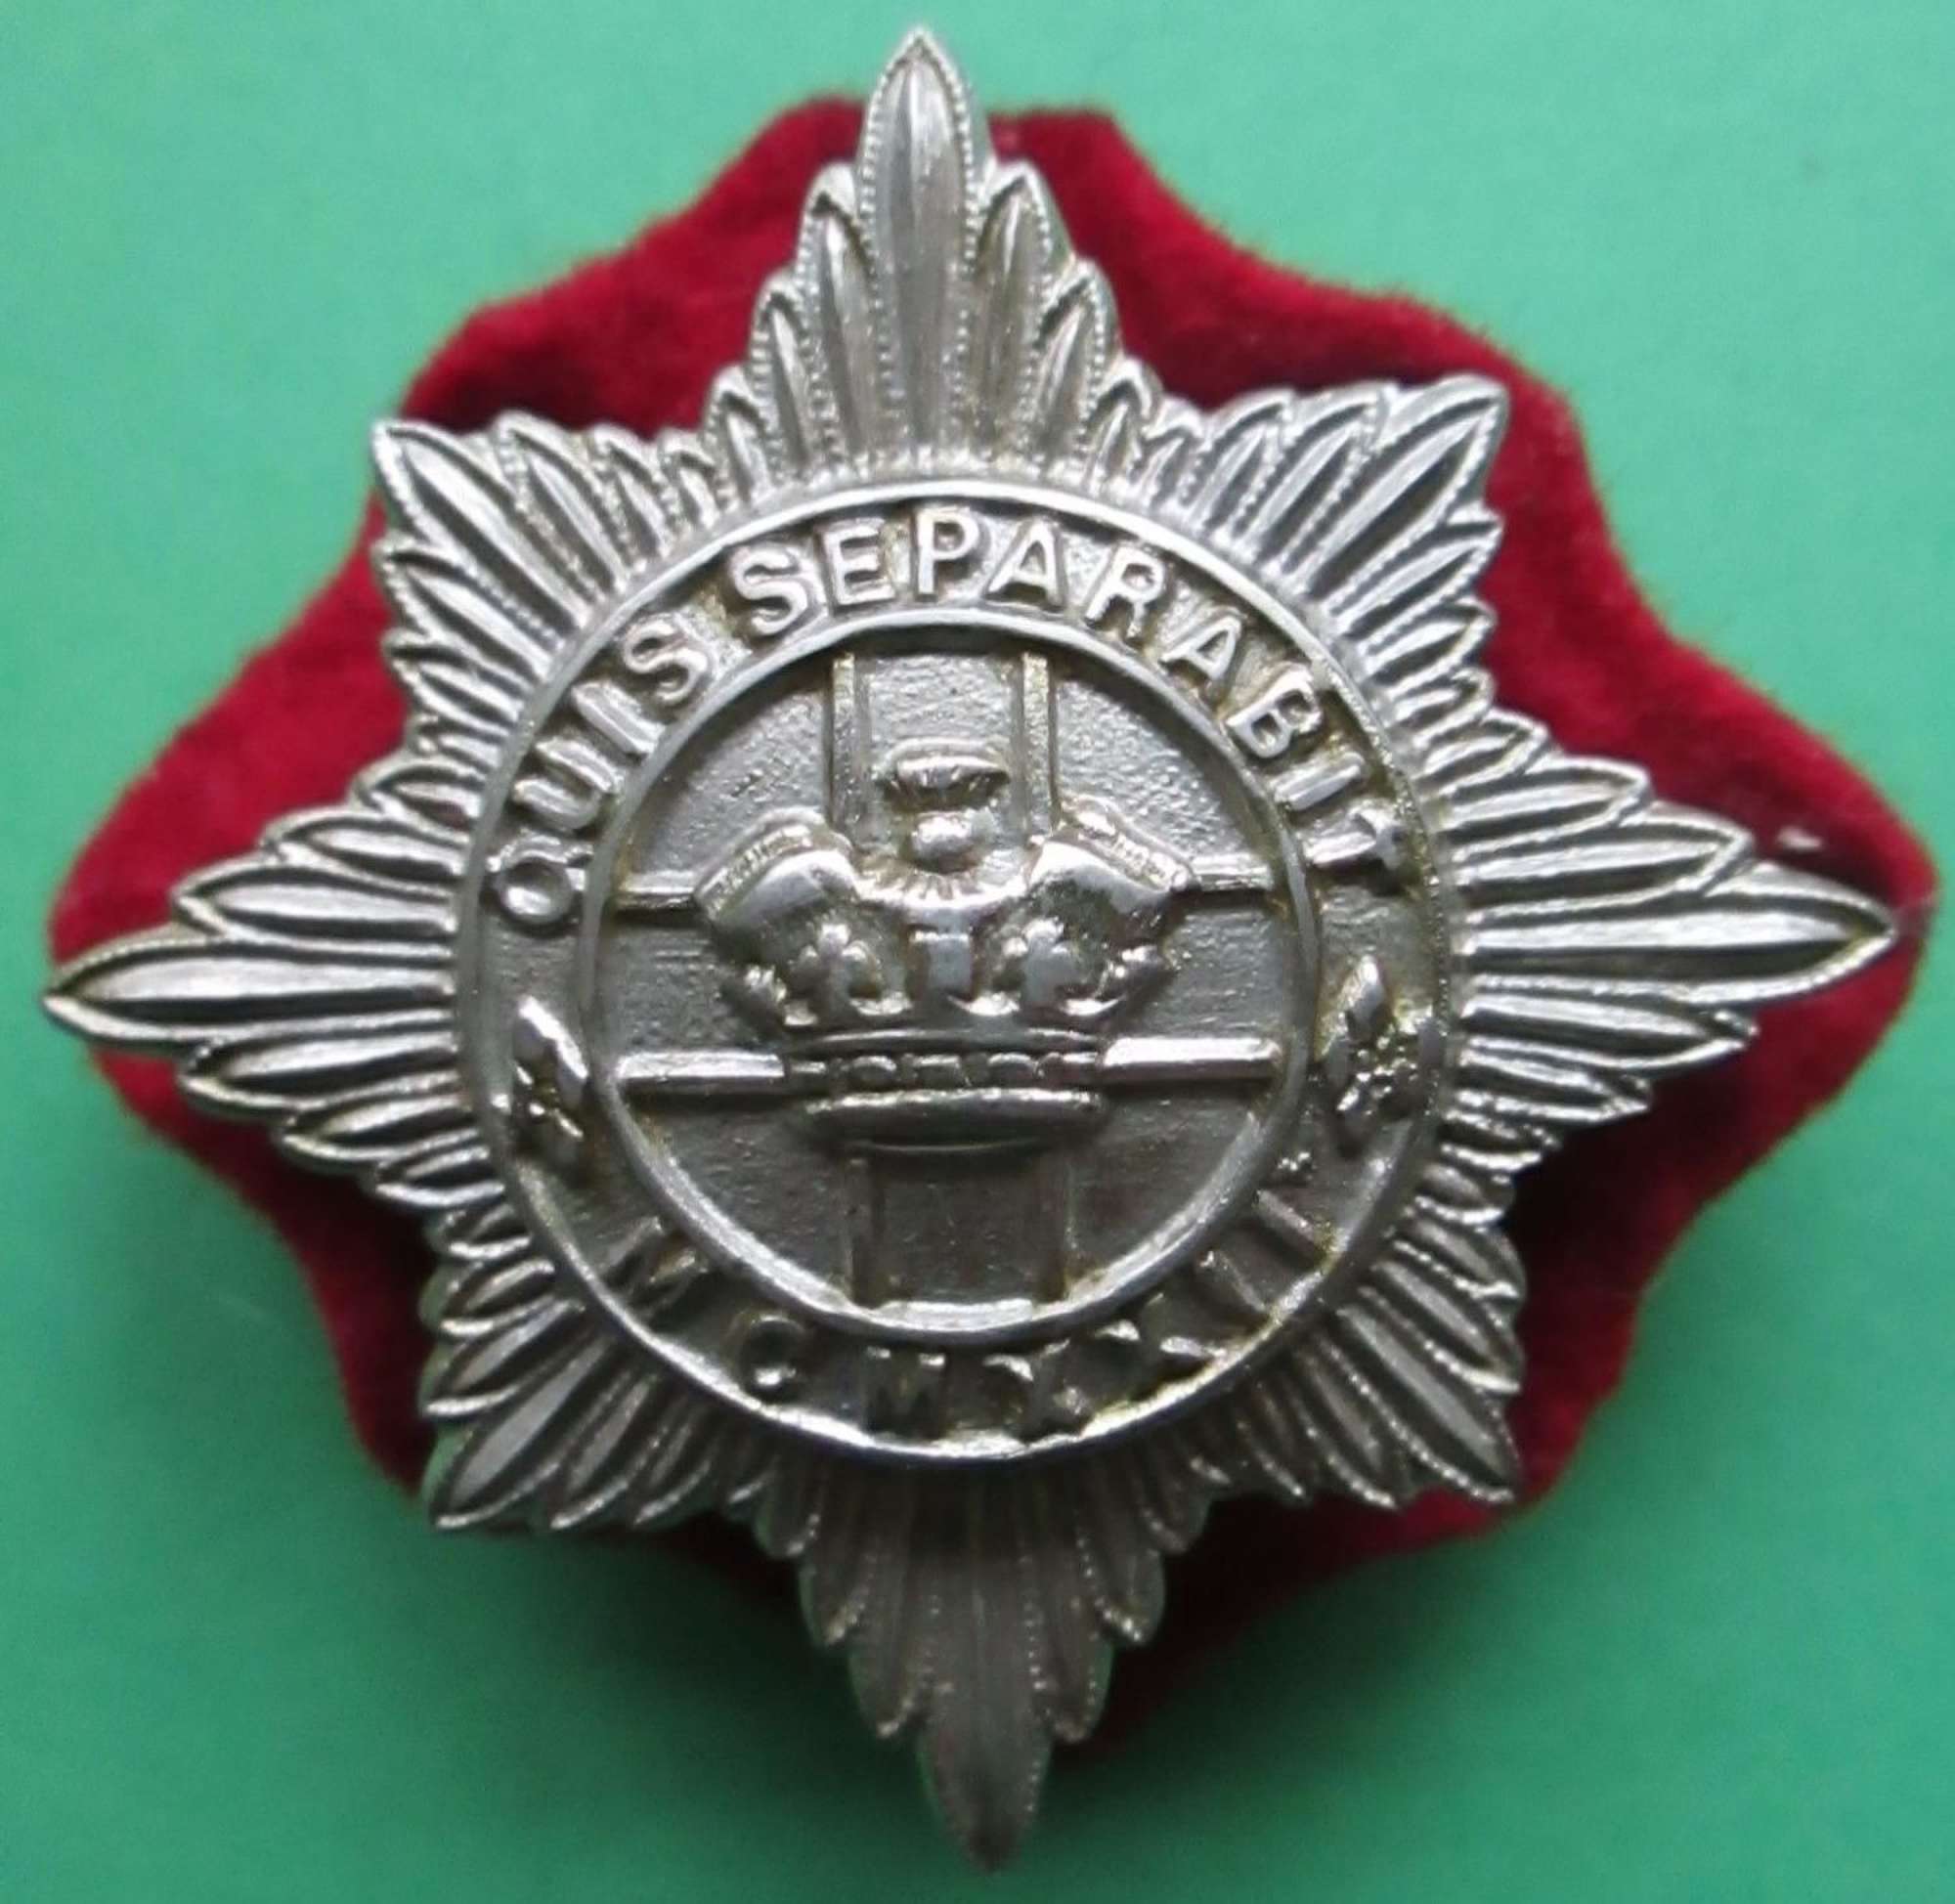 A 4TH / 7TH HUSSARS OTHER RANKS CAP BADGE WITH ITS RED BACKING CLOTH